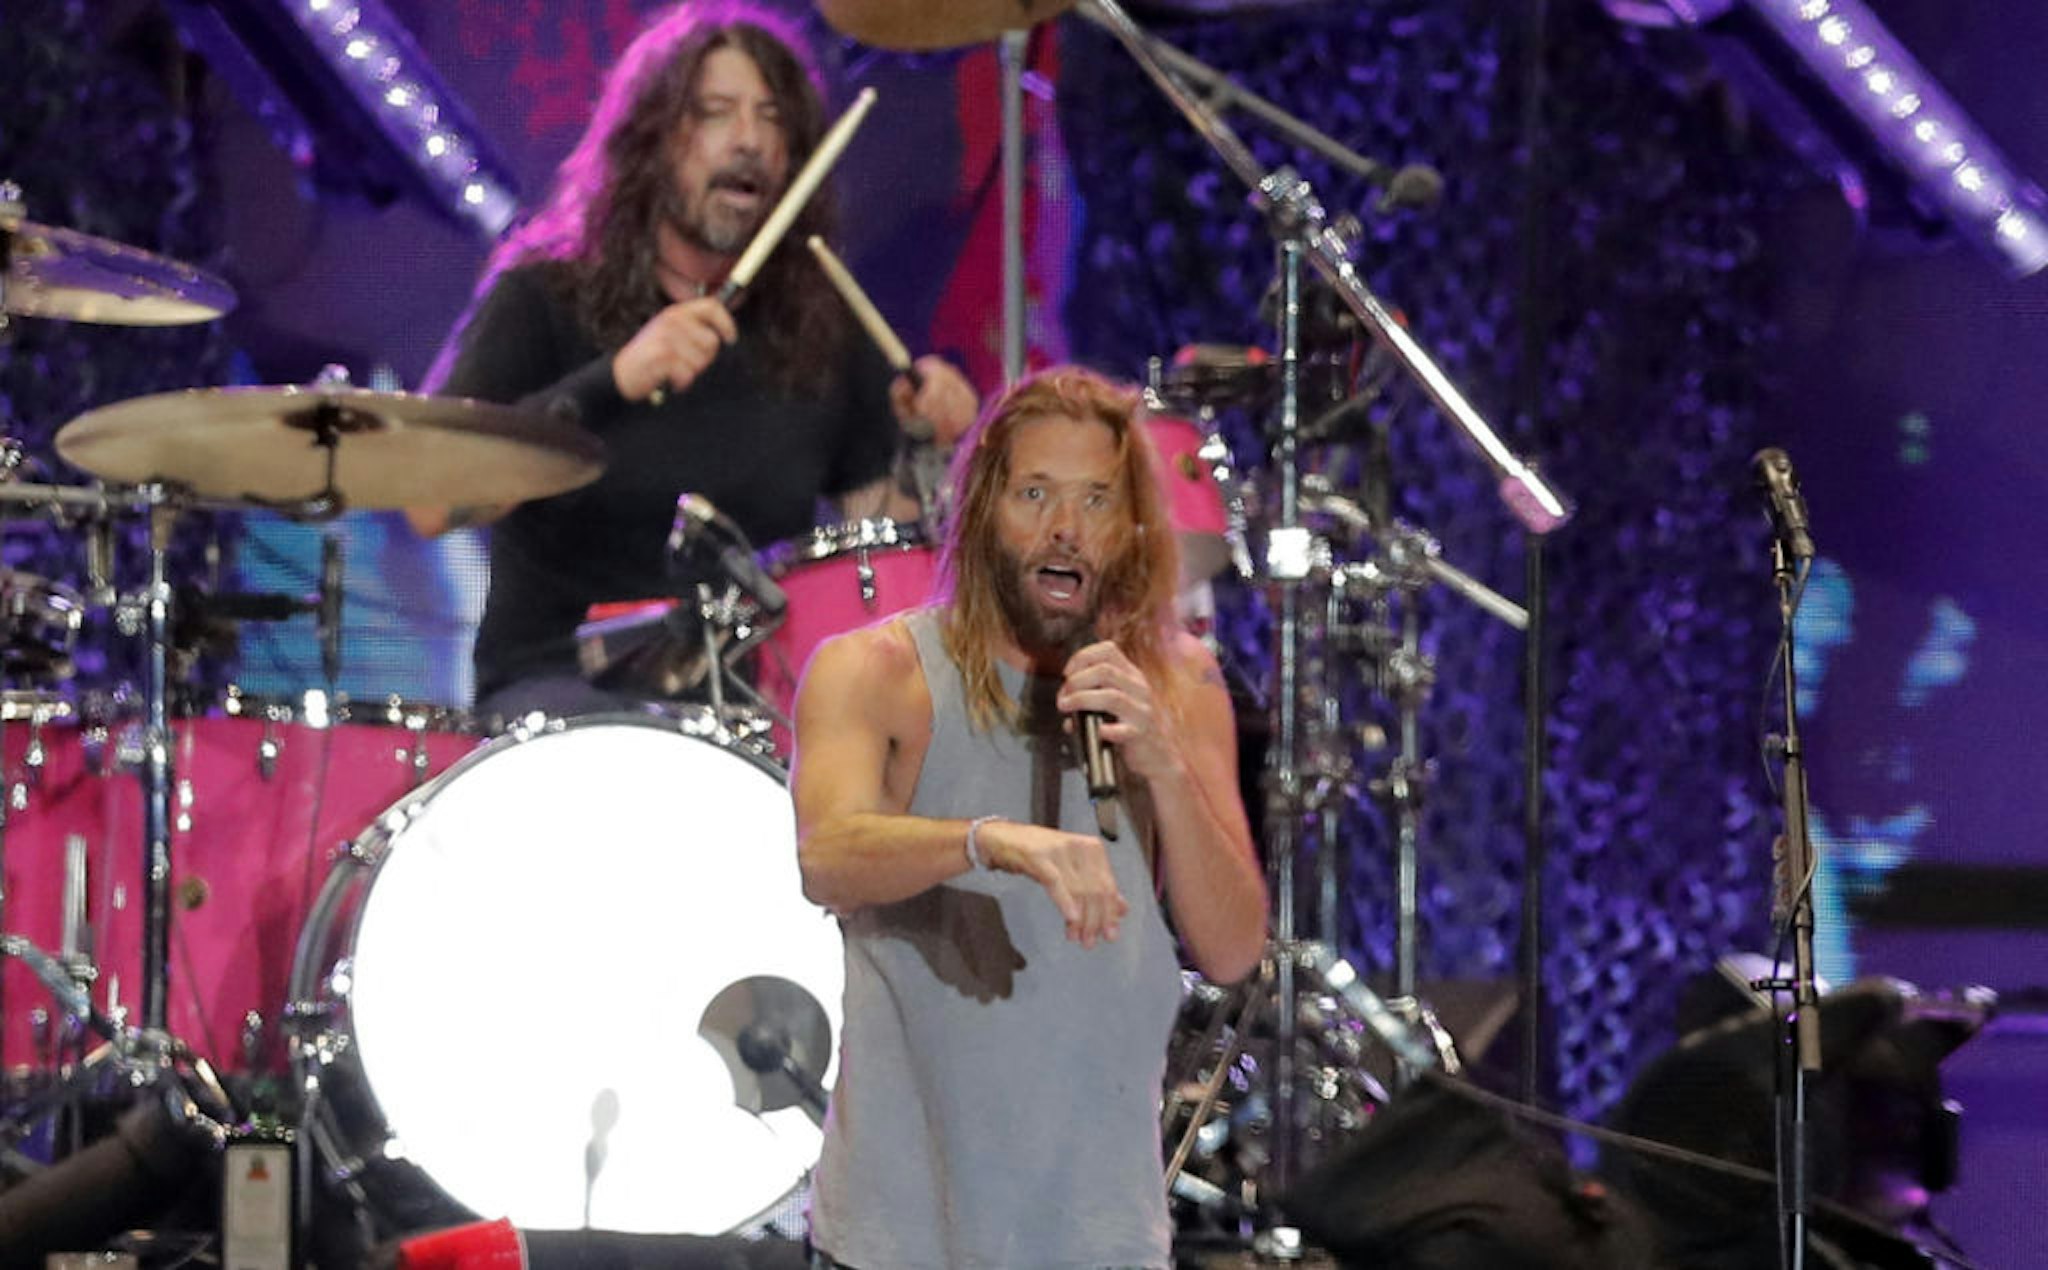 Picture taken on March 18, 2022 of Foo Fighters' drummer Taylor Hawkins and lead singer Dave Grohl on stage, at the Lollapalooza 2022 music festival in Santiago.